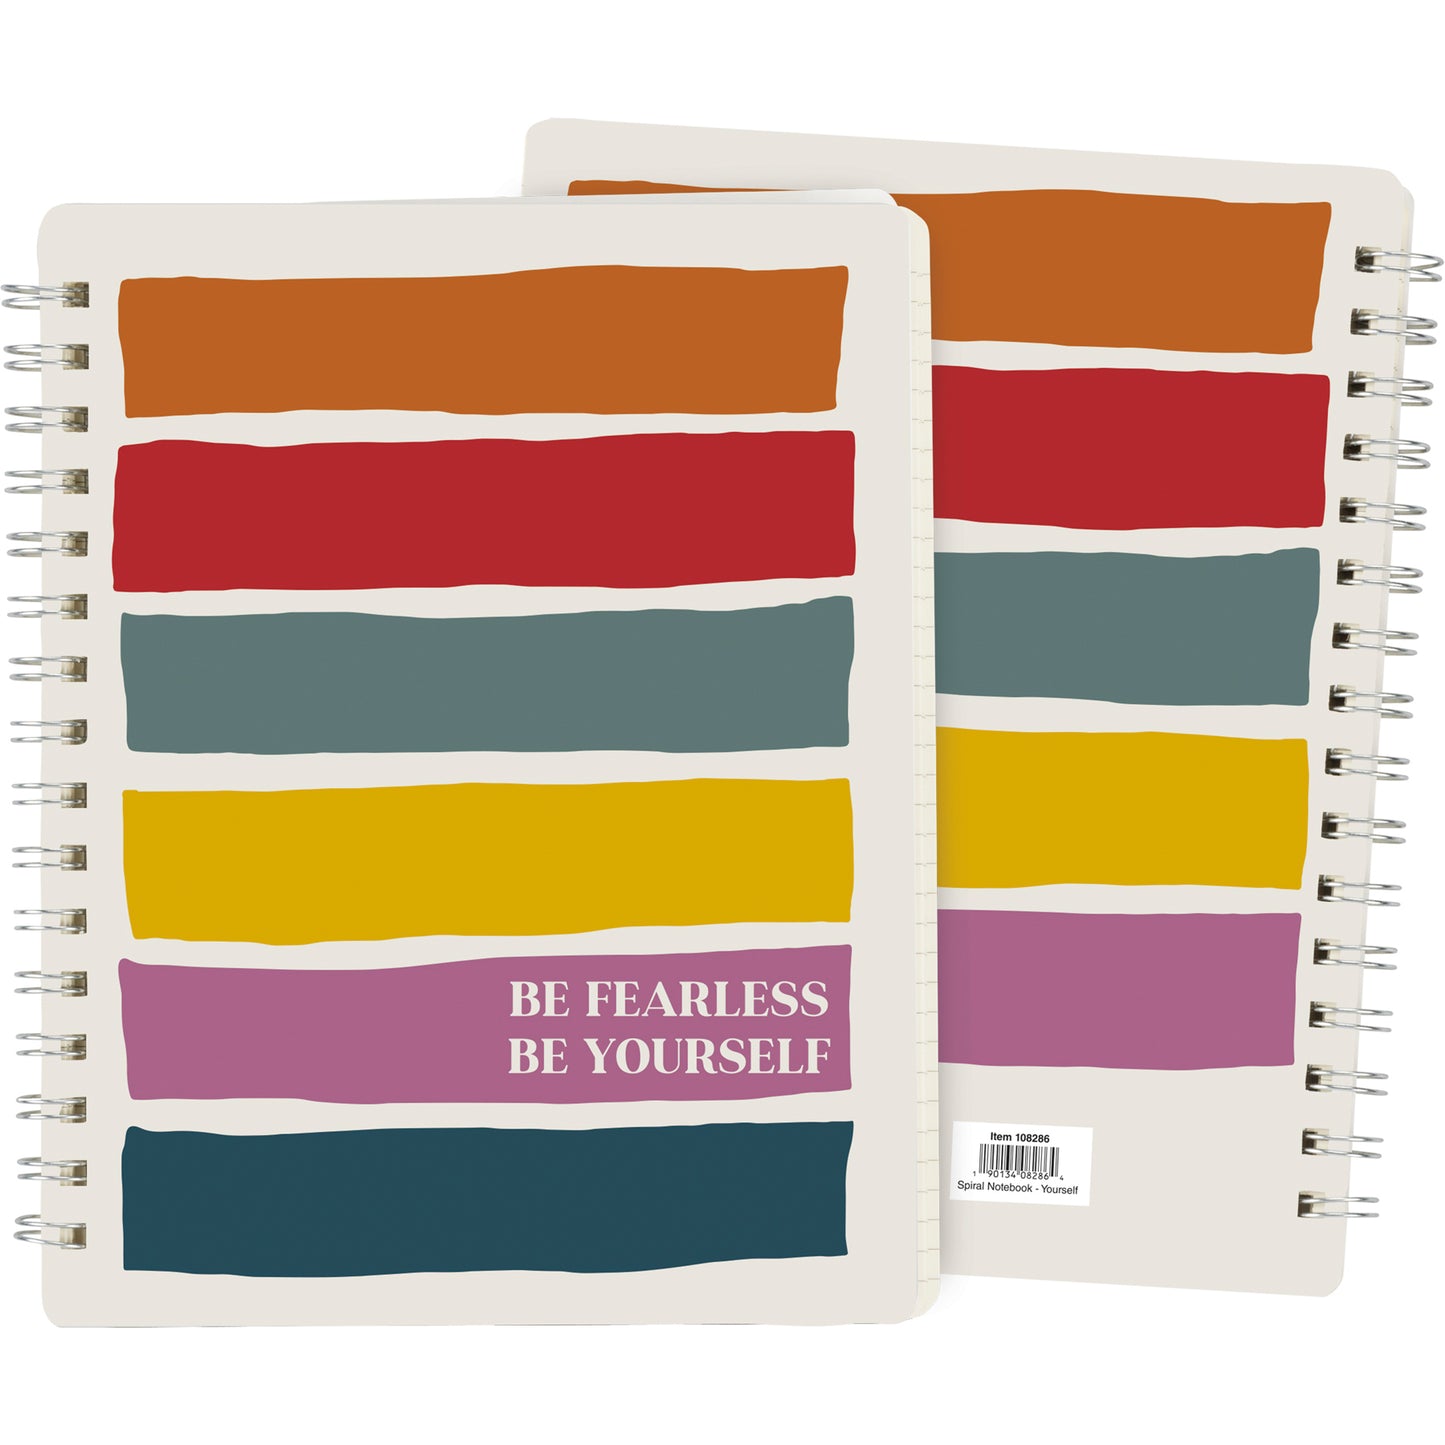 Fearless Pride Notebook SolagoHome